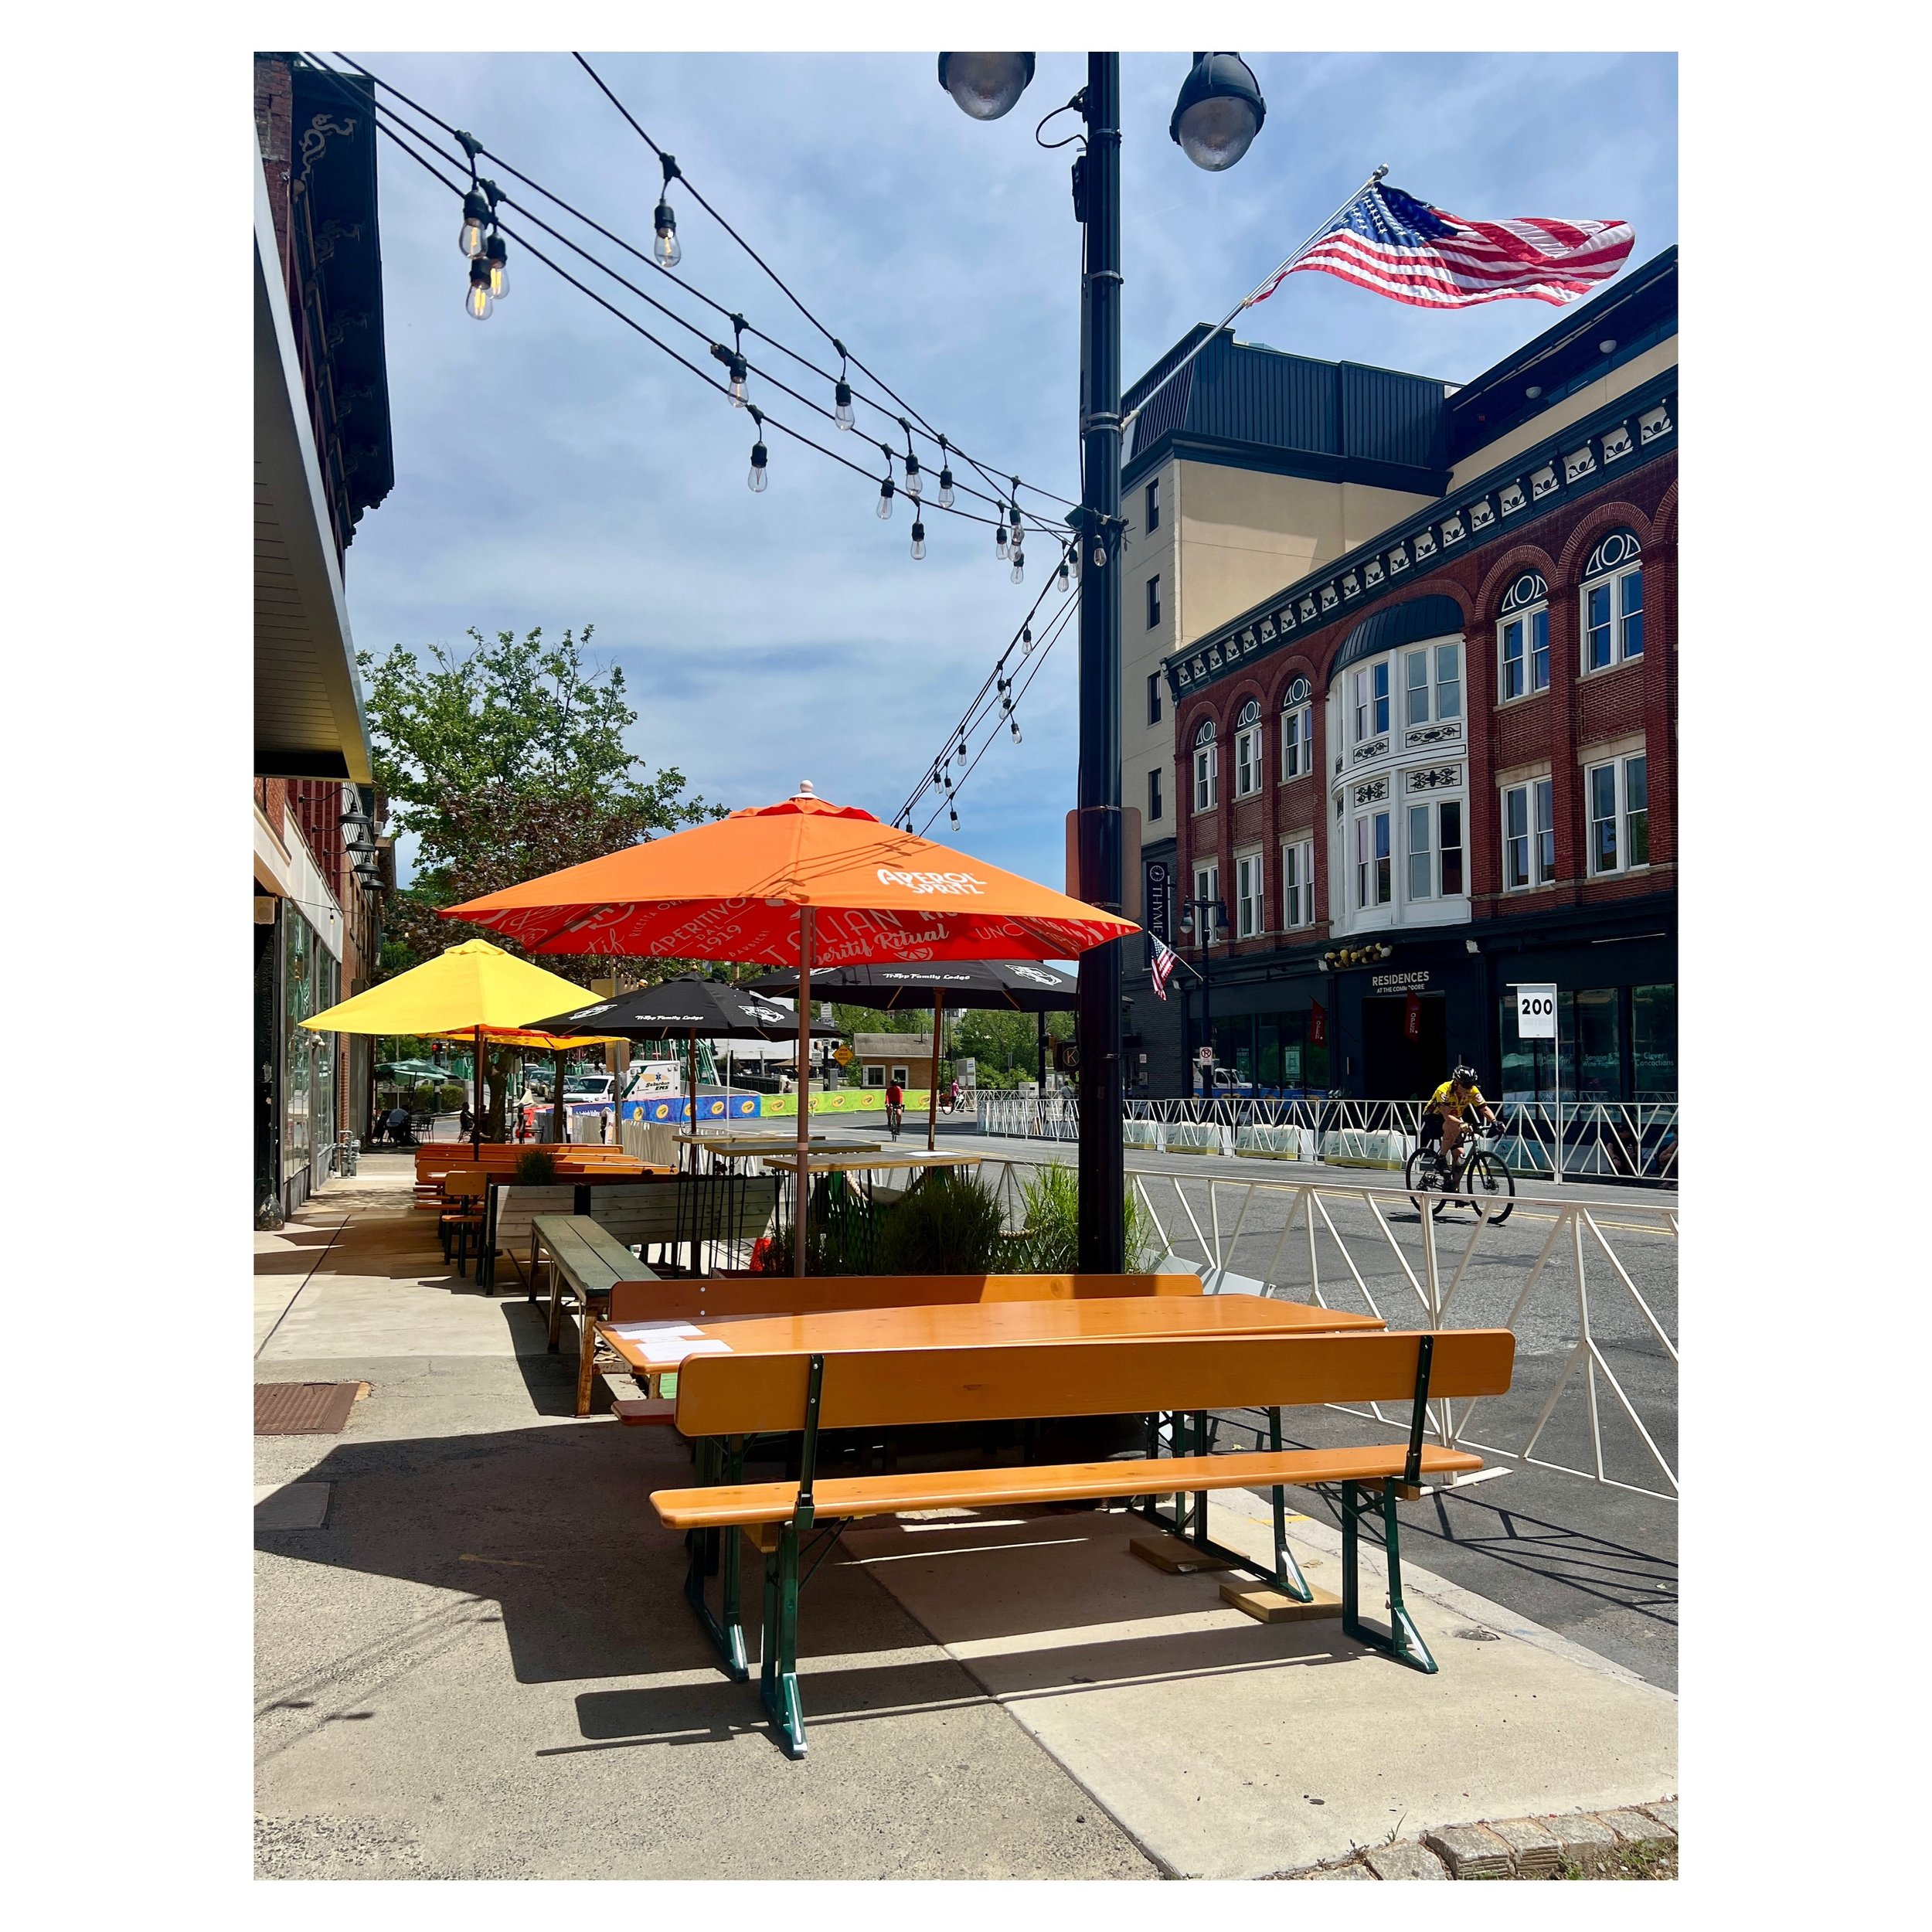 Cheers to the holiday weekend! We have a lineup of special stuff happening, including this pop-up beer garden for the Easton Twilight Criterium (only a few trackside patio tables left; book on Resy). Tables still available for regular indoor dinner s